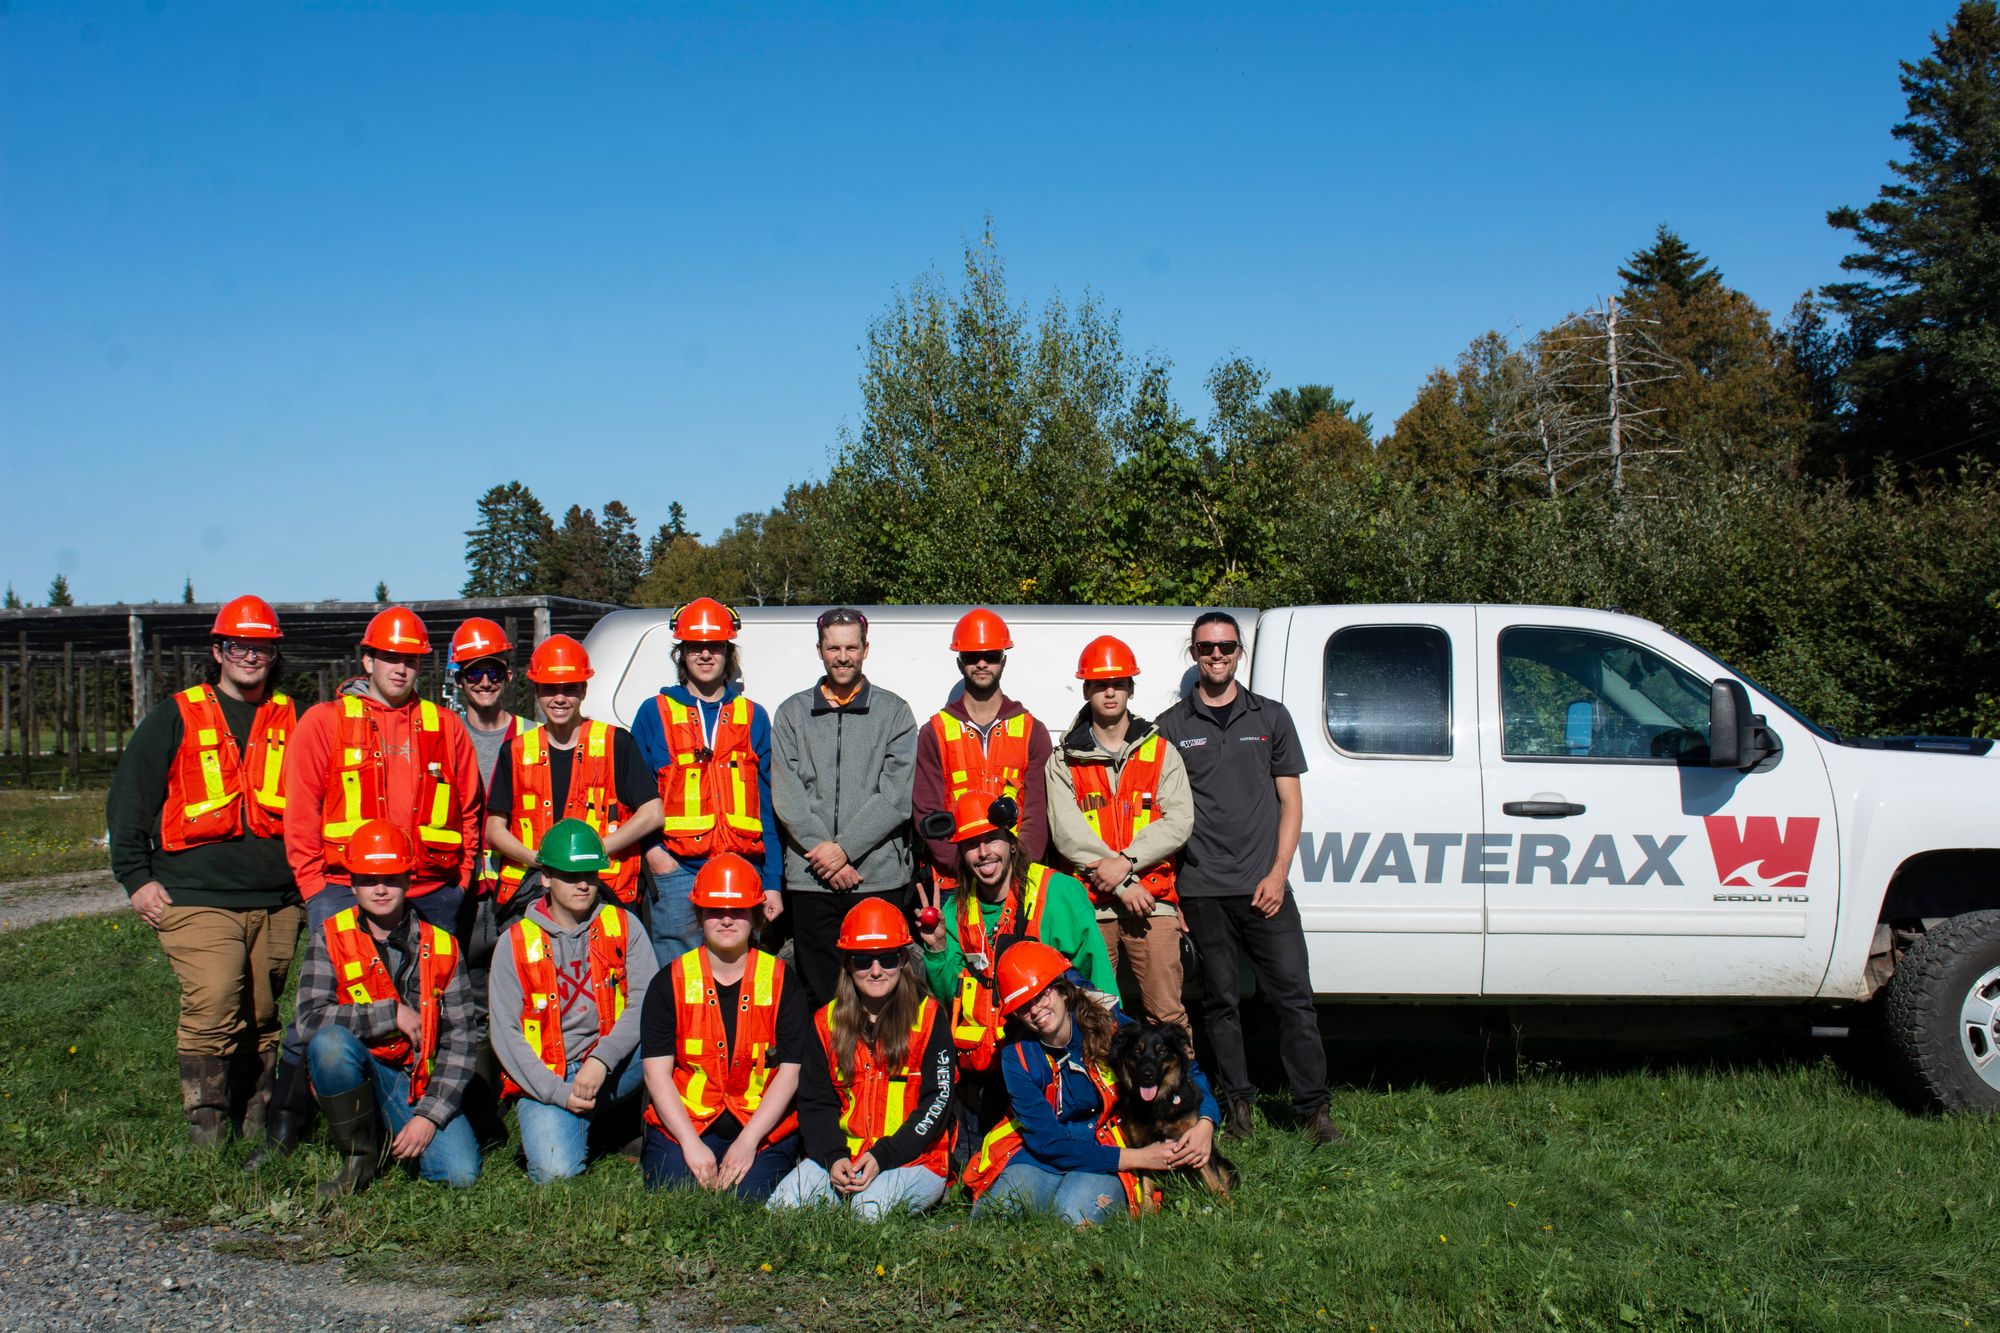 WATERAX at The Maritime College of Forest Technology’s Fire Lab in Fredericton, New Brunswick